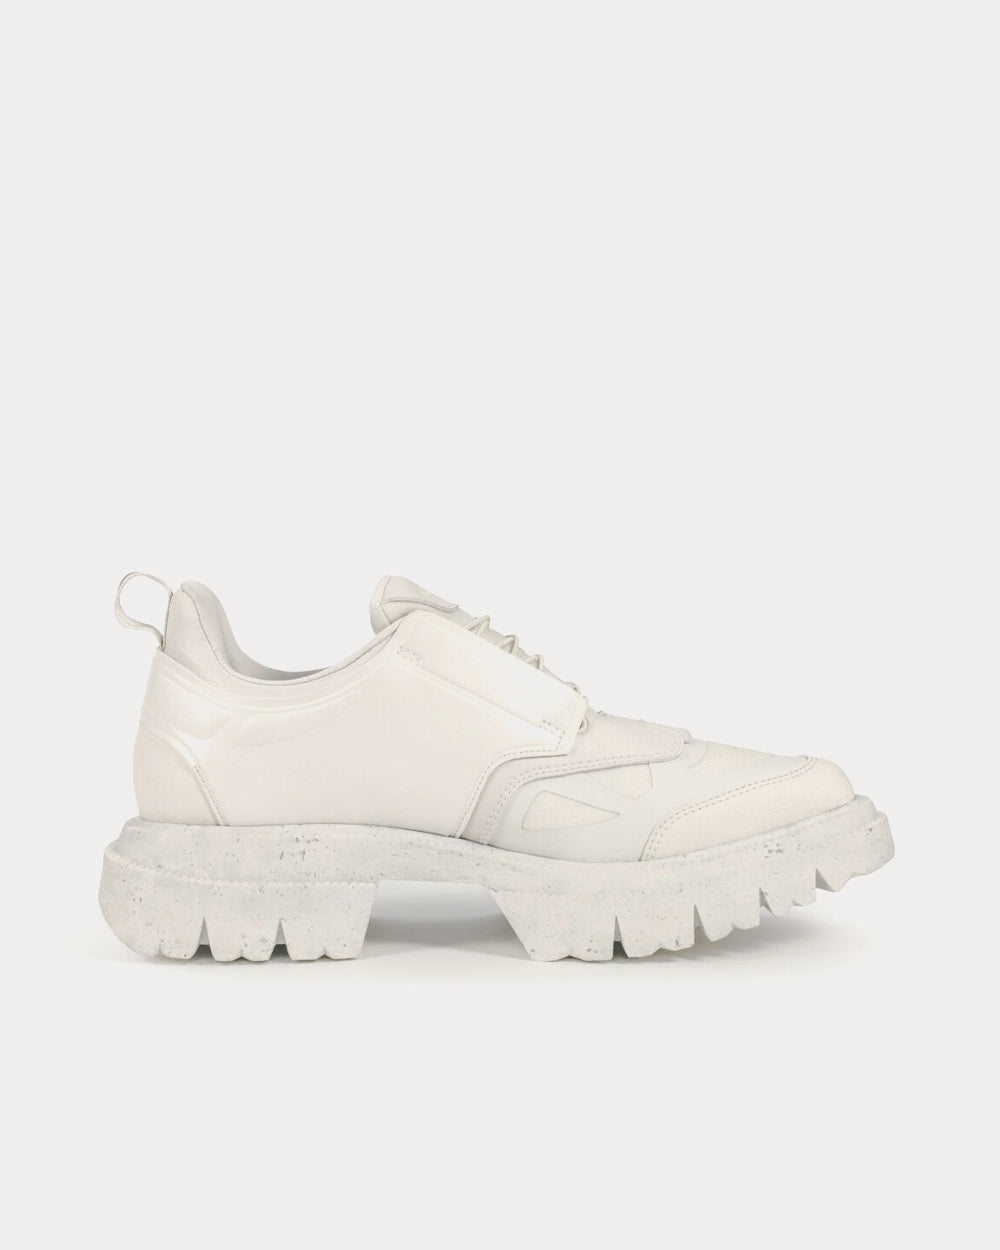 Untitlab - untitled#12 Vary White Low Top Sneakers